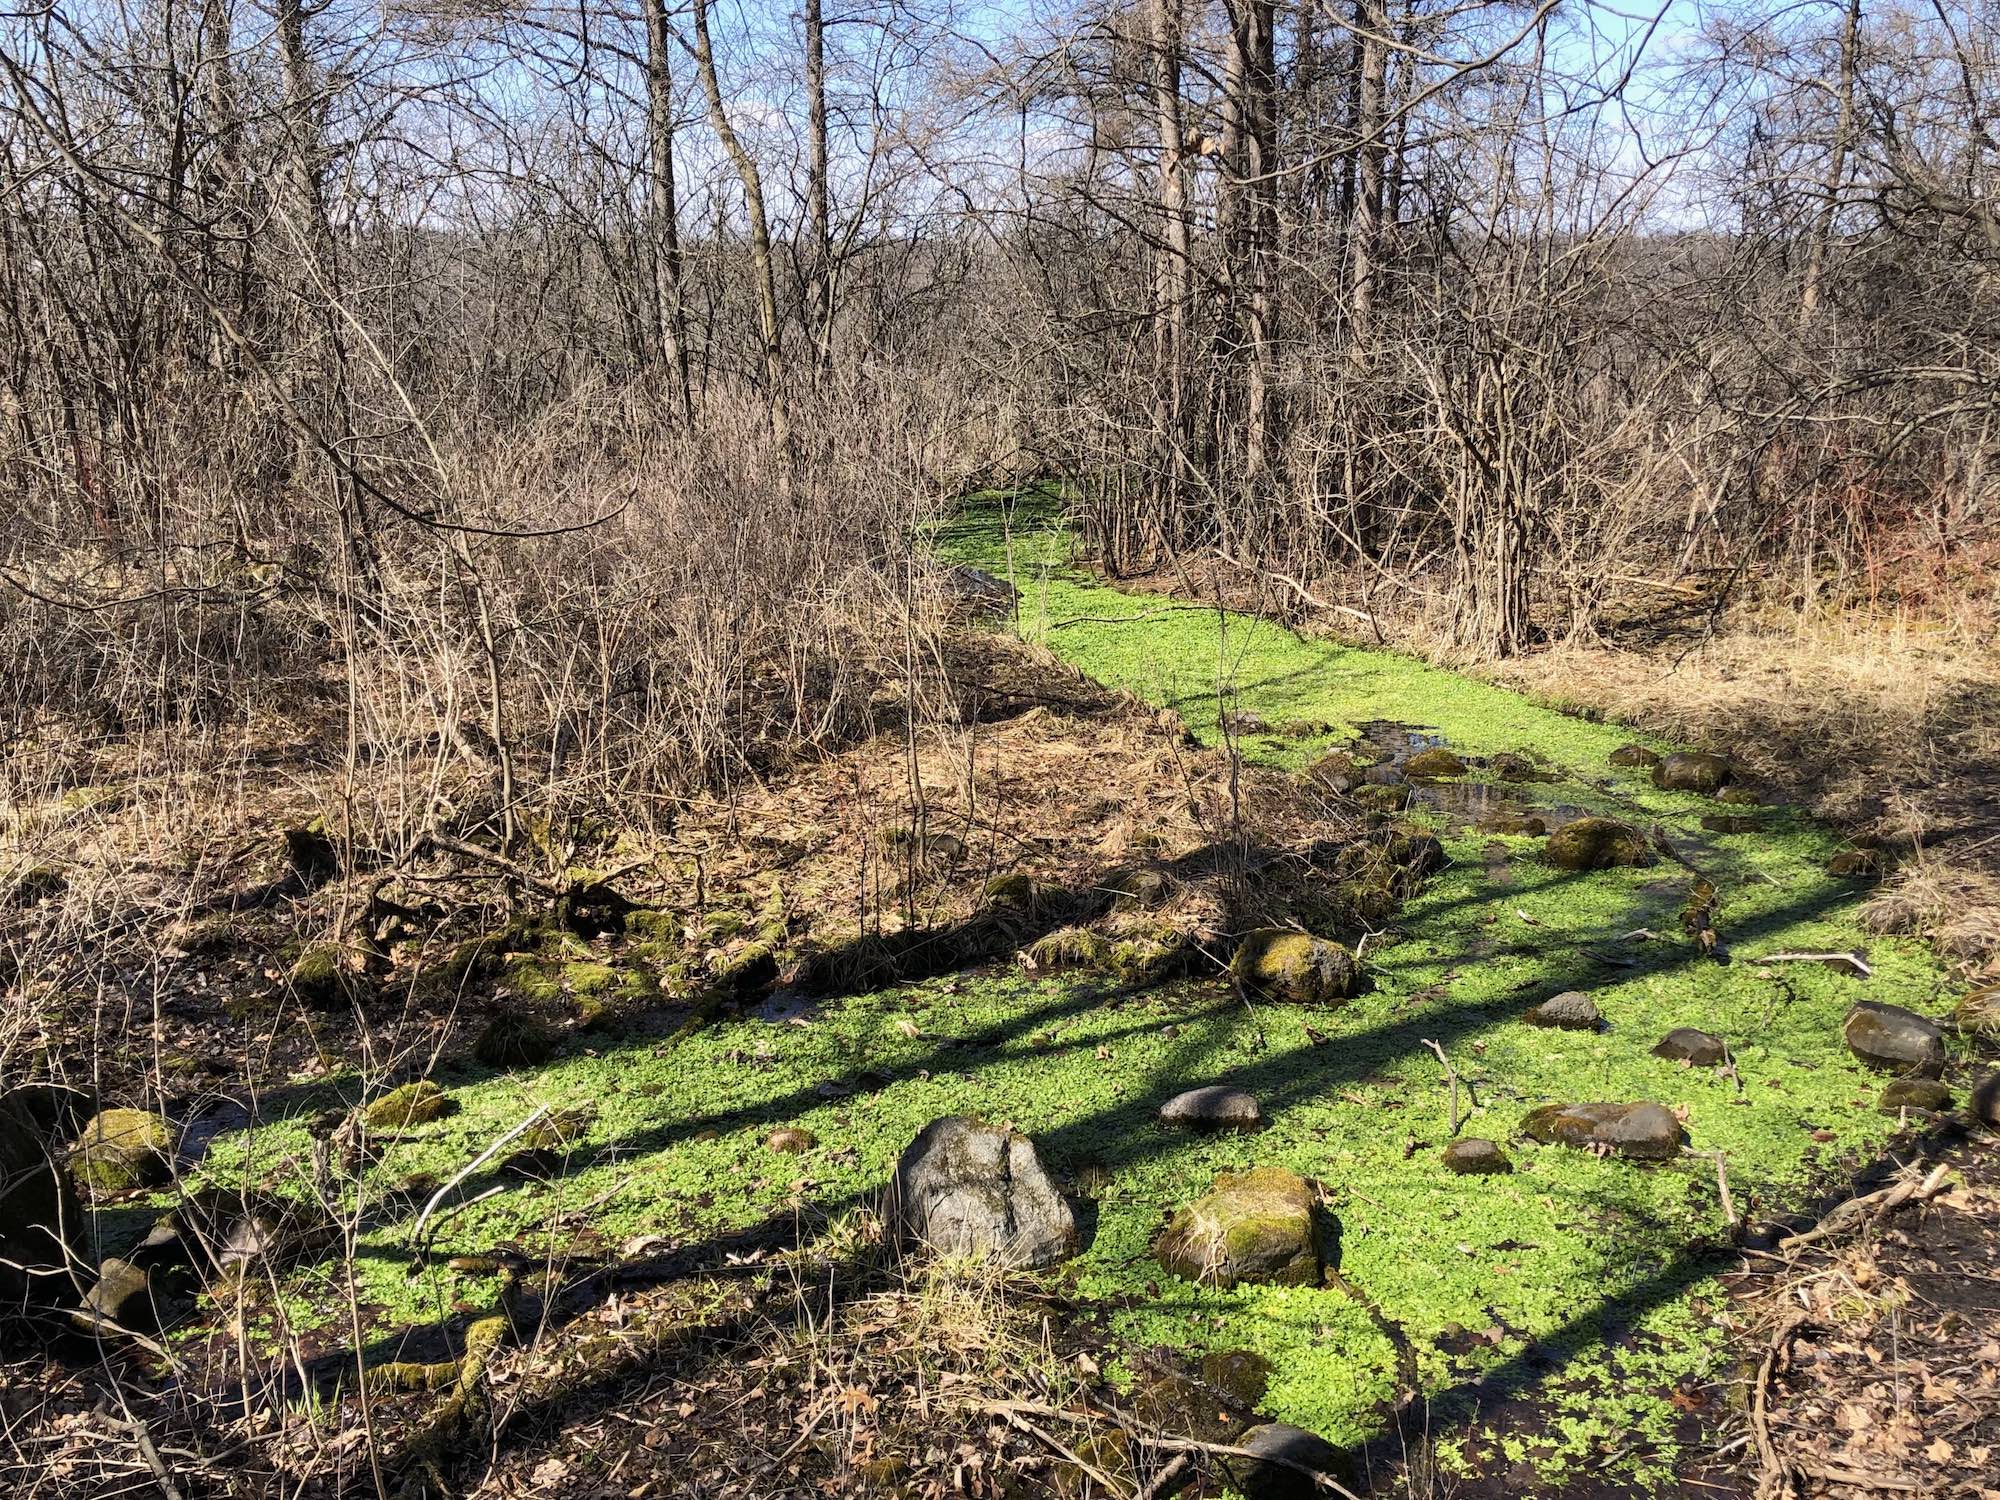 White Clay Spring flowing into Lake Wingra in the University of Wisconsin Arboretum on March 21, 2019.